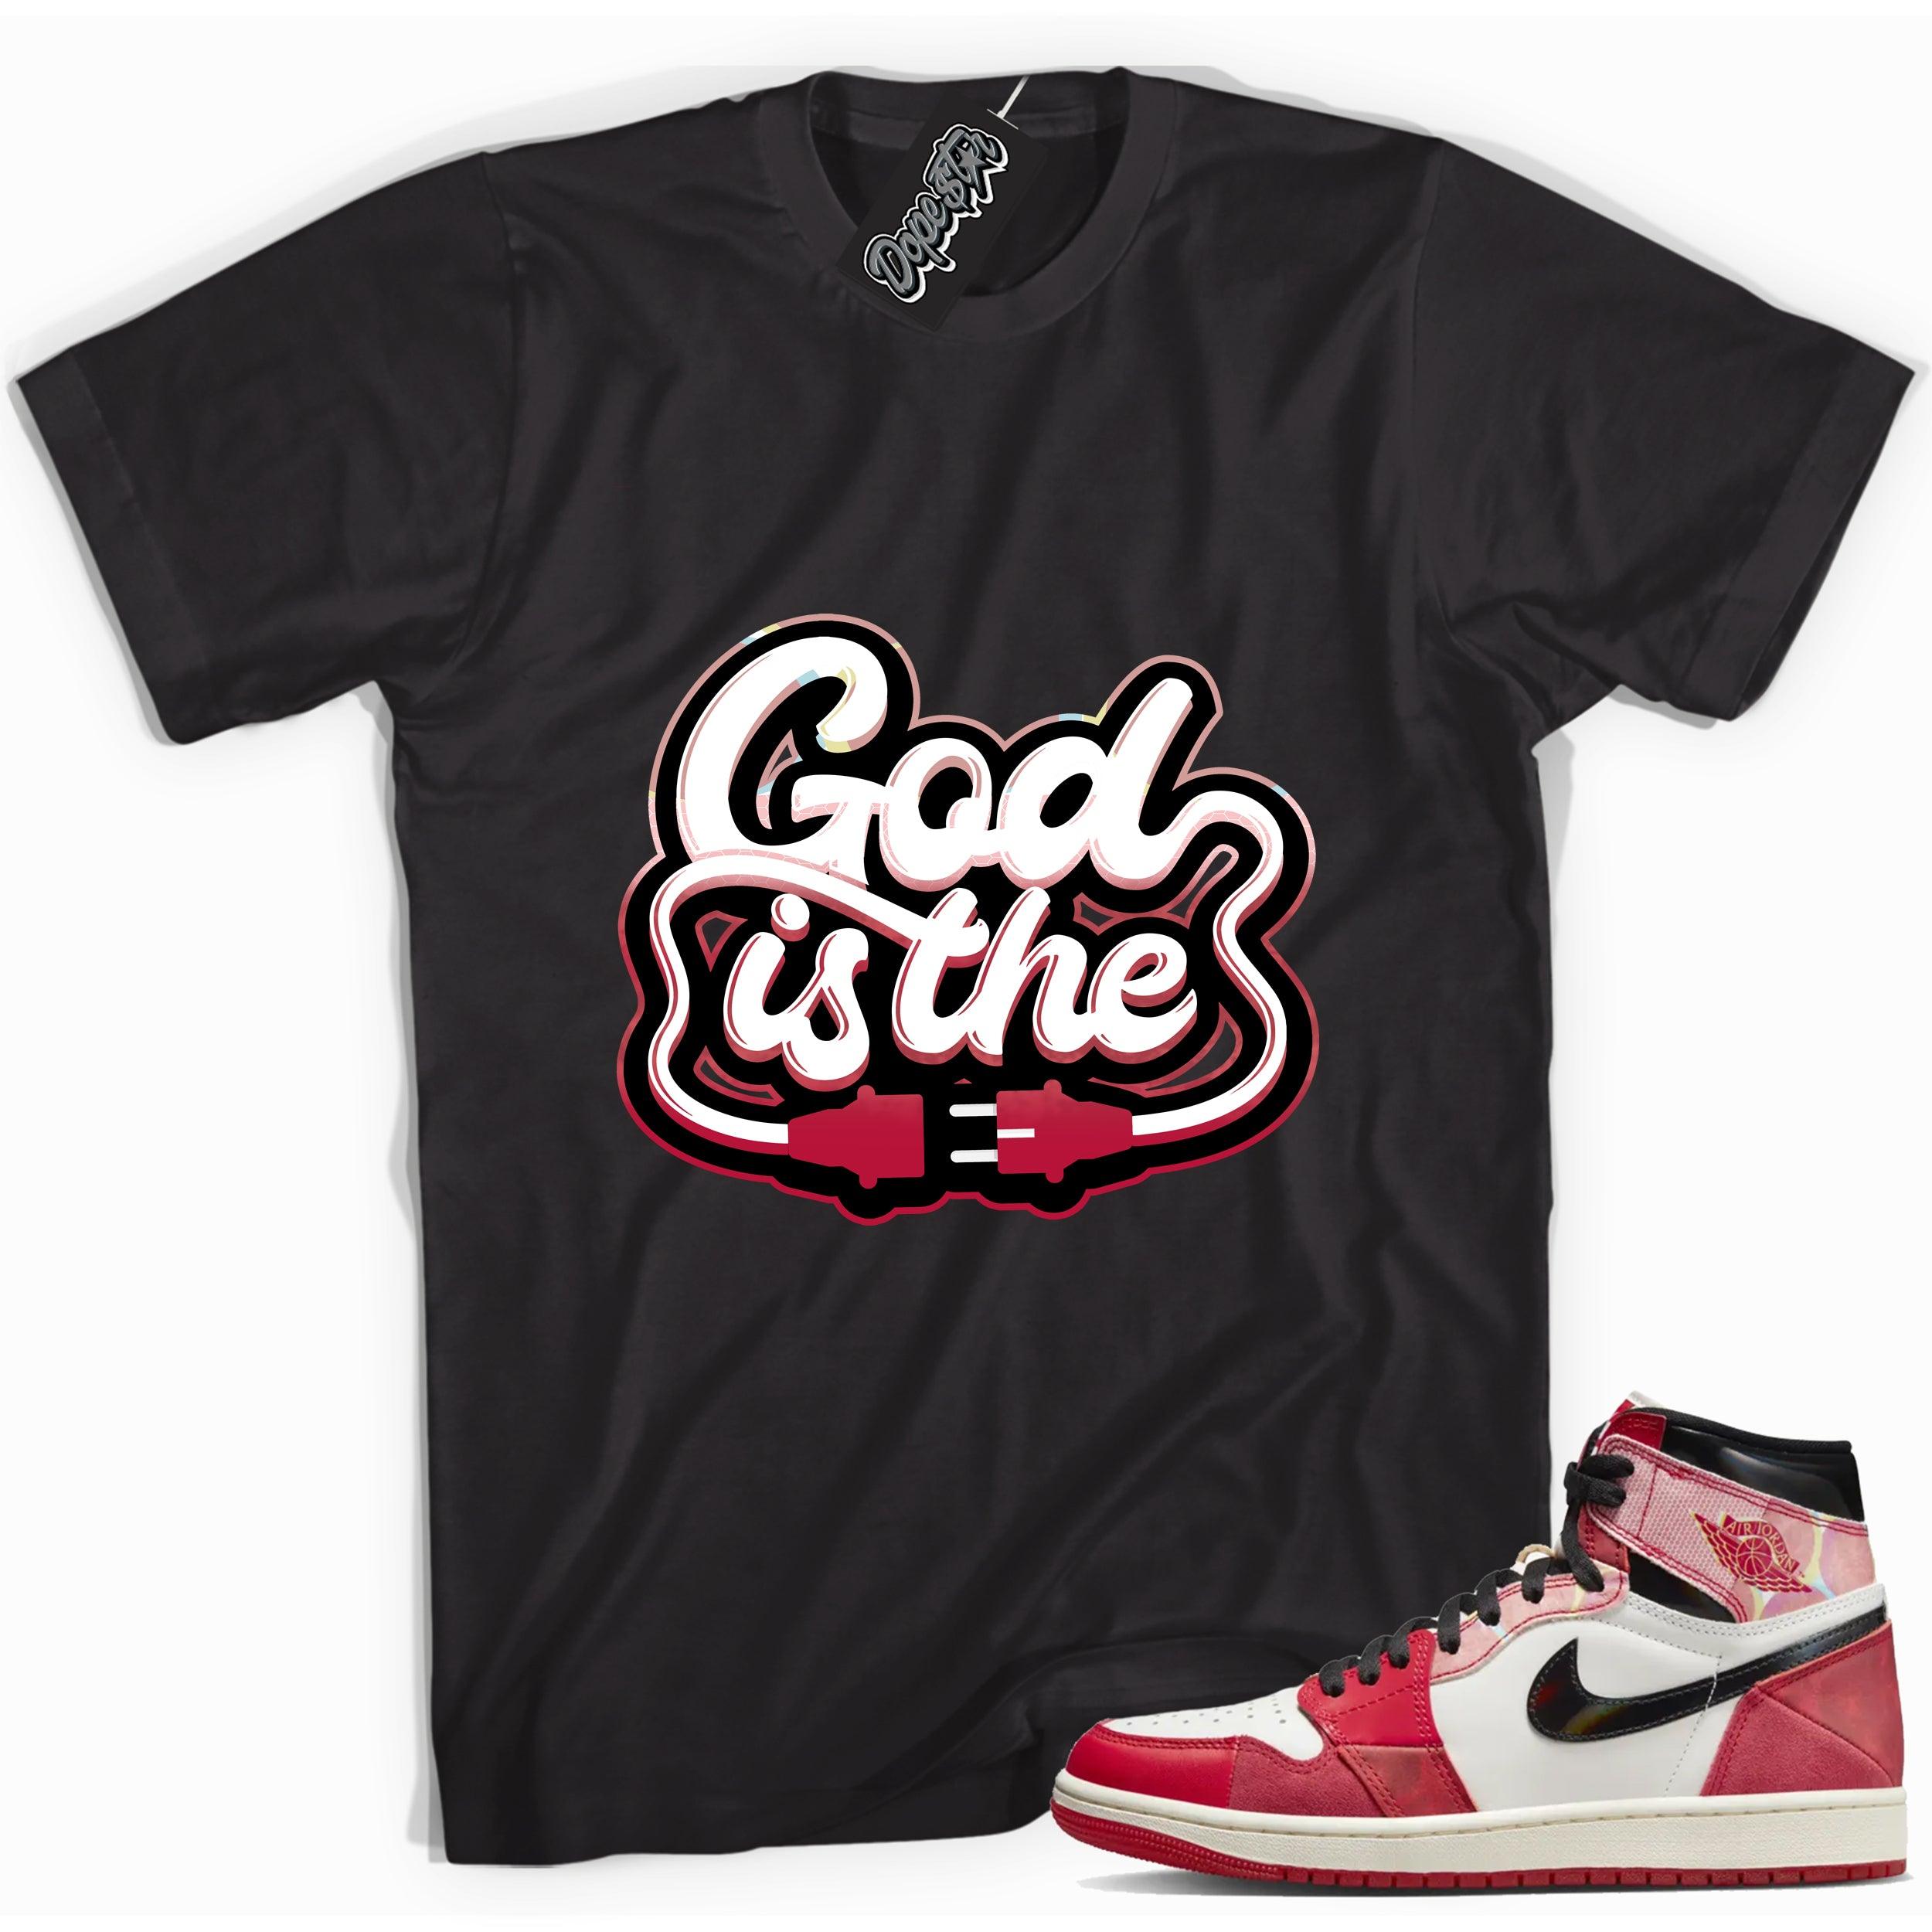 Cool Black graphic tee with “ GOD IS THE ” print, that perfectly matches AIR JORDAN 1 Retro High OG NEXT CHAPTER SPIDER-VERSE  sneakers 